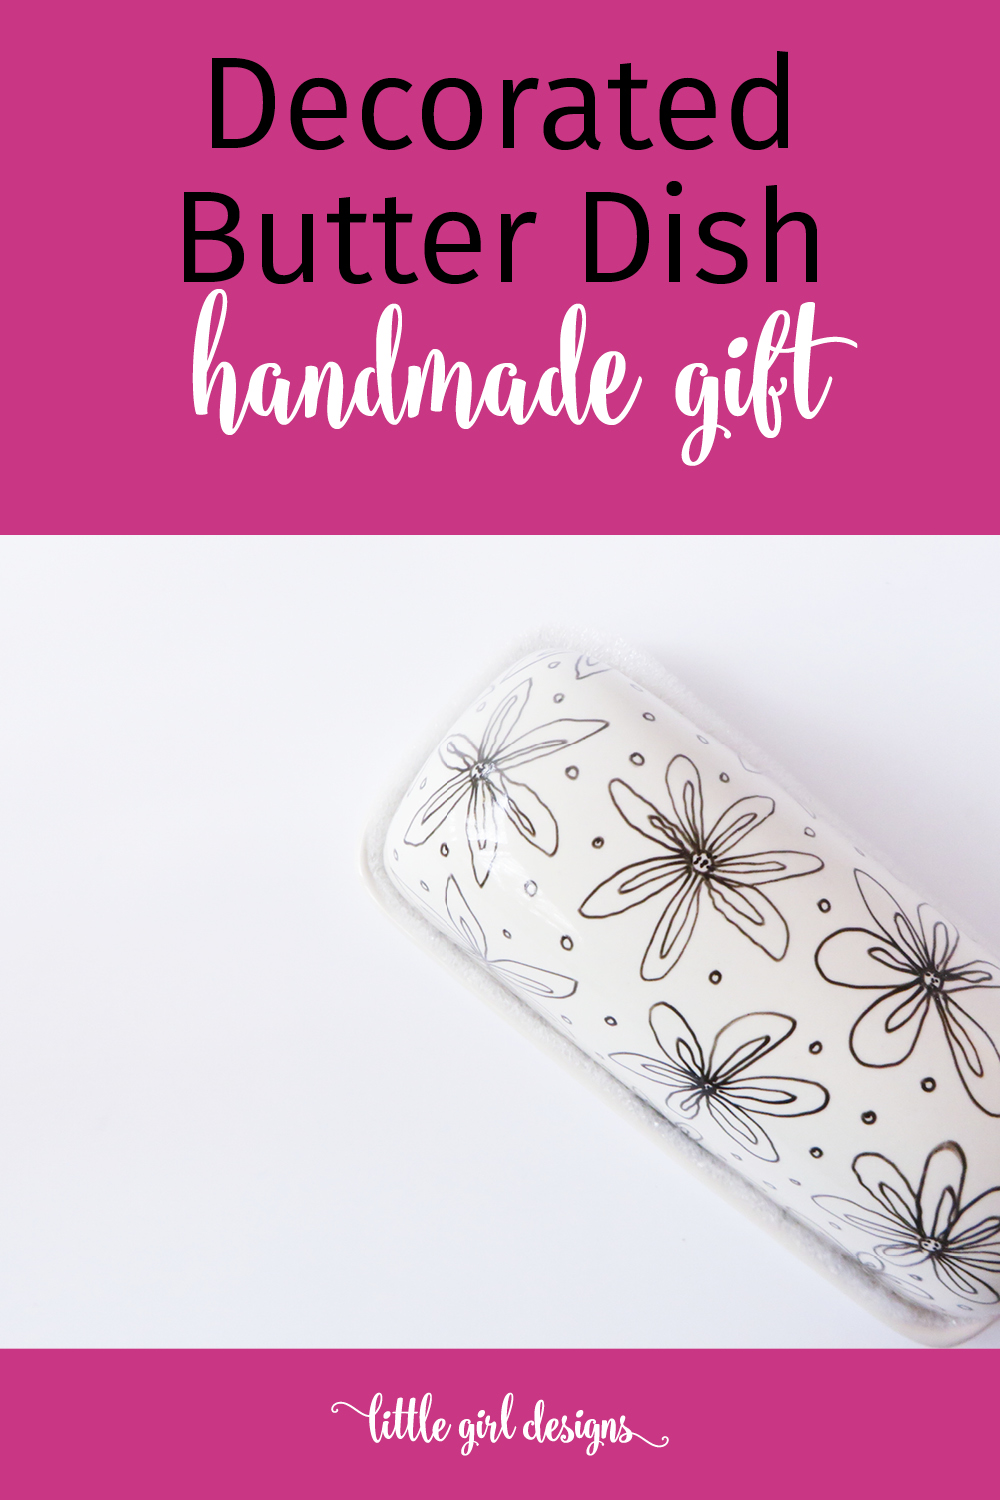 Make a Decorated Butter Dish